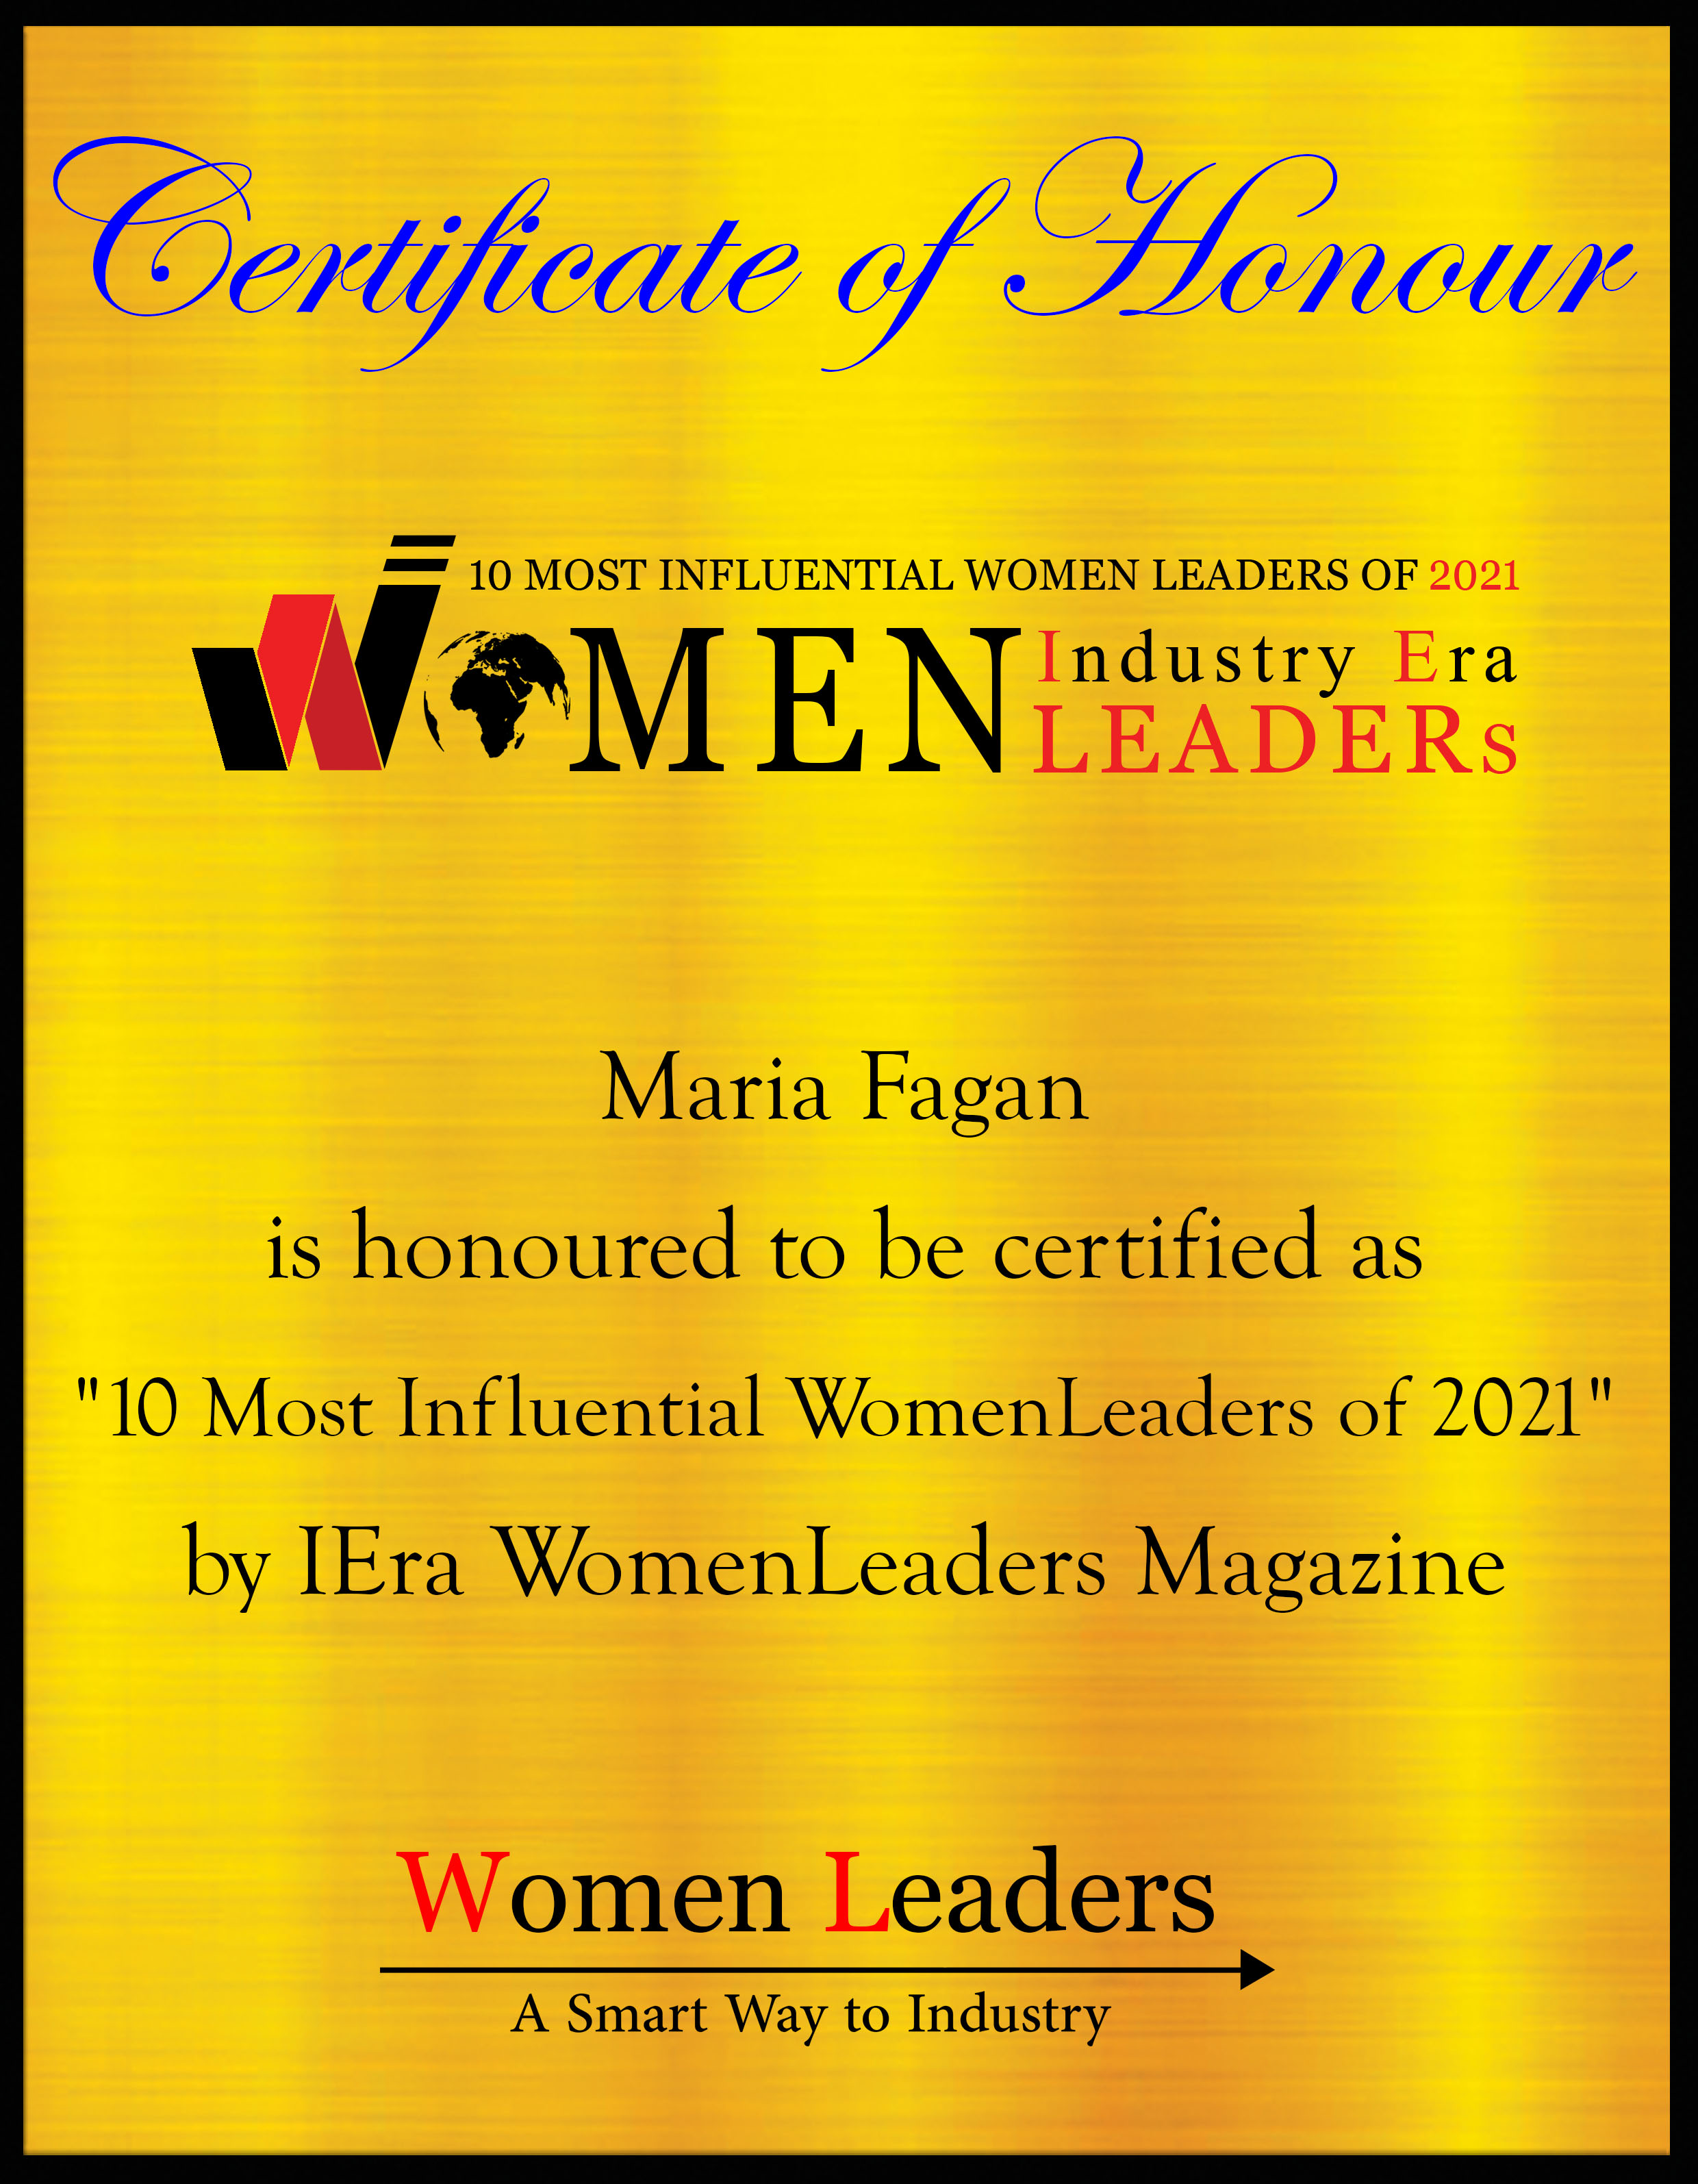 Maria Fagan, President of RQM+, Most Influential WomenLeaders of 2021